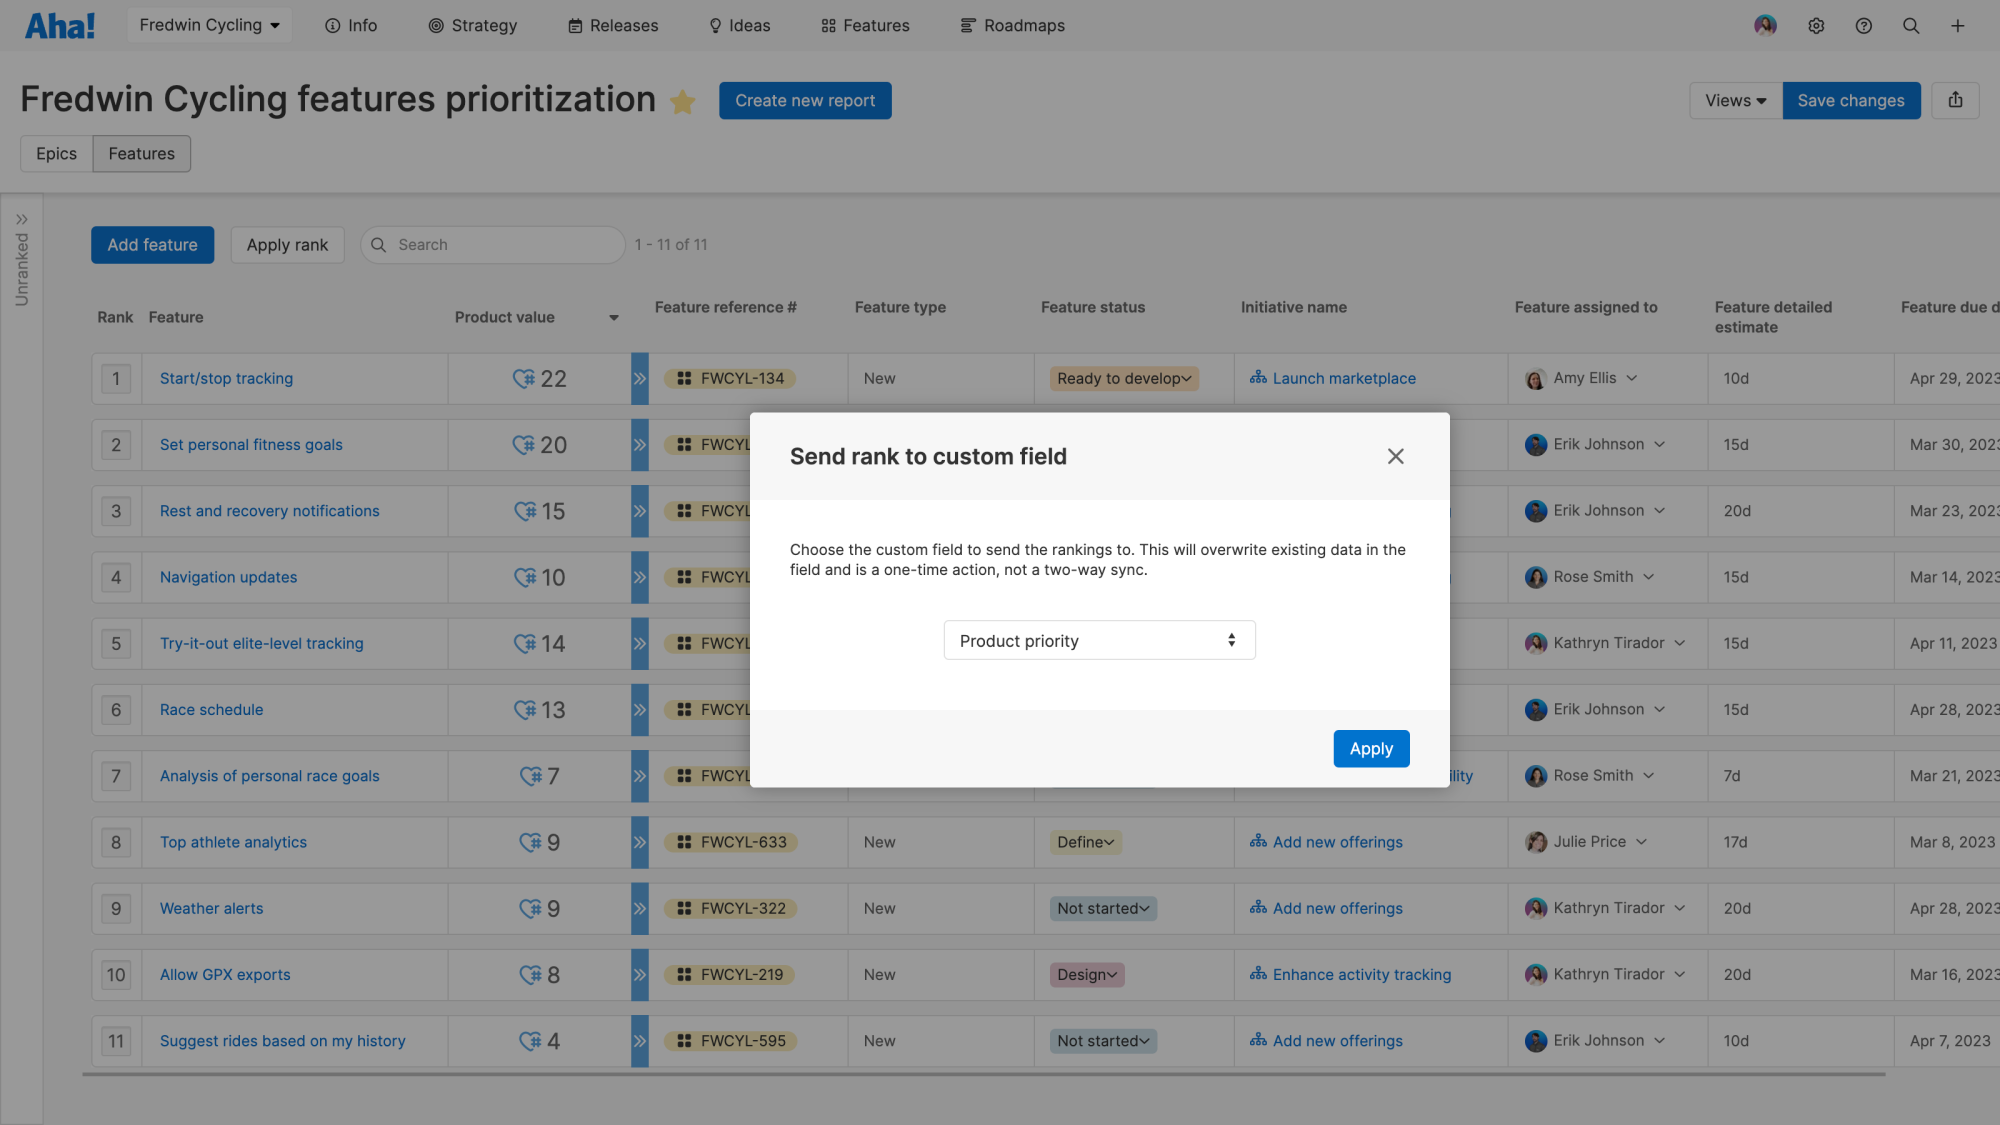 Support / RN - Share Ranked Features With Engineering — From the Prioritization View